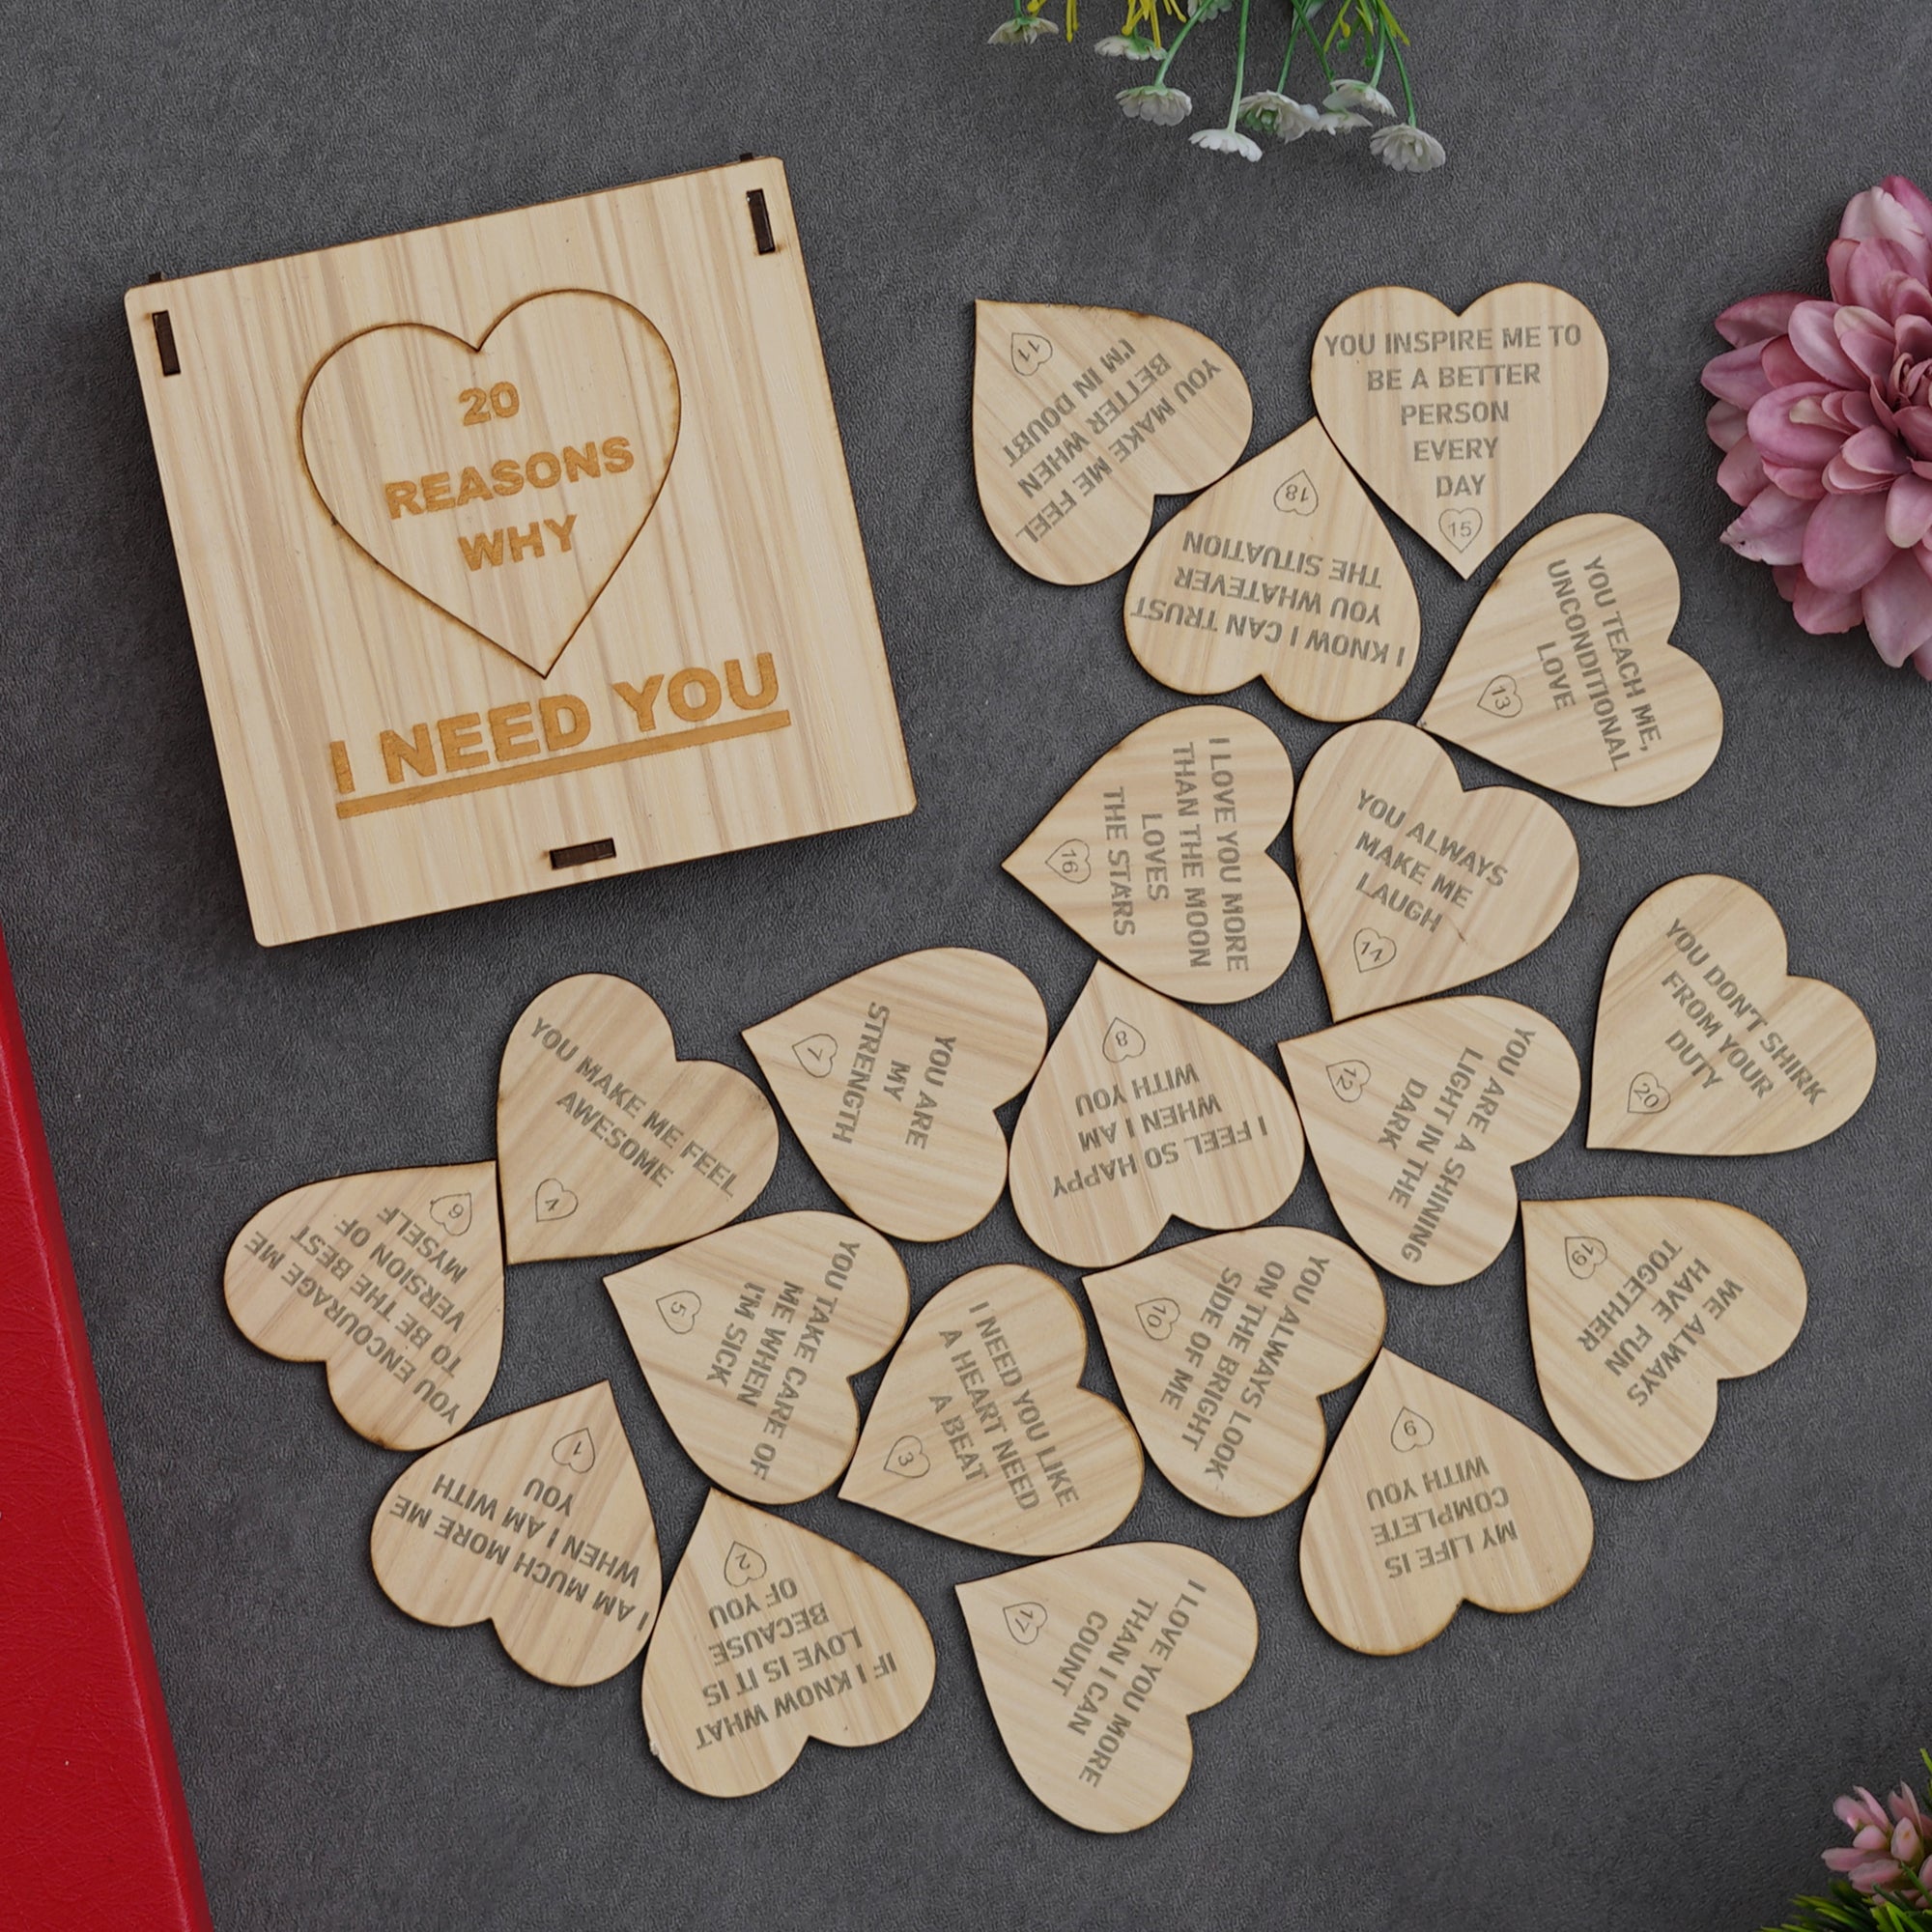 Valentine Combo of Pack of 8 Love Gift Cards, Golden Rose Gift Set, "20 Reasons Why I Need You" Printed on Little Hearts Wooden Gift Set 5